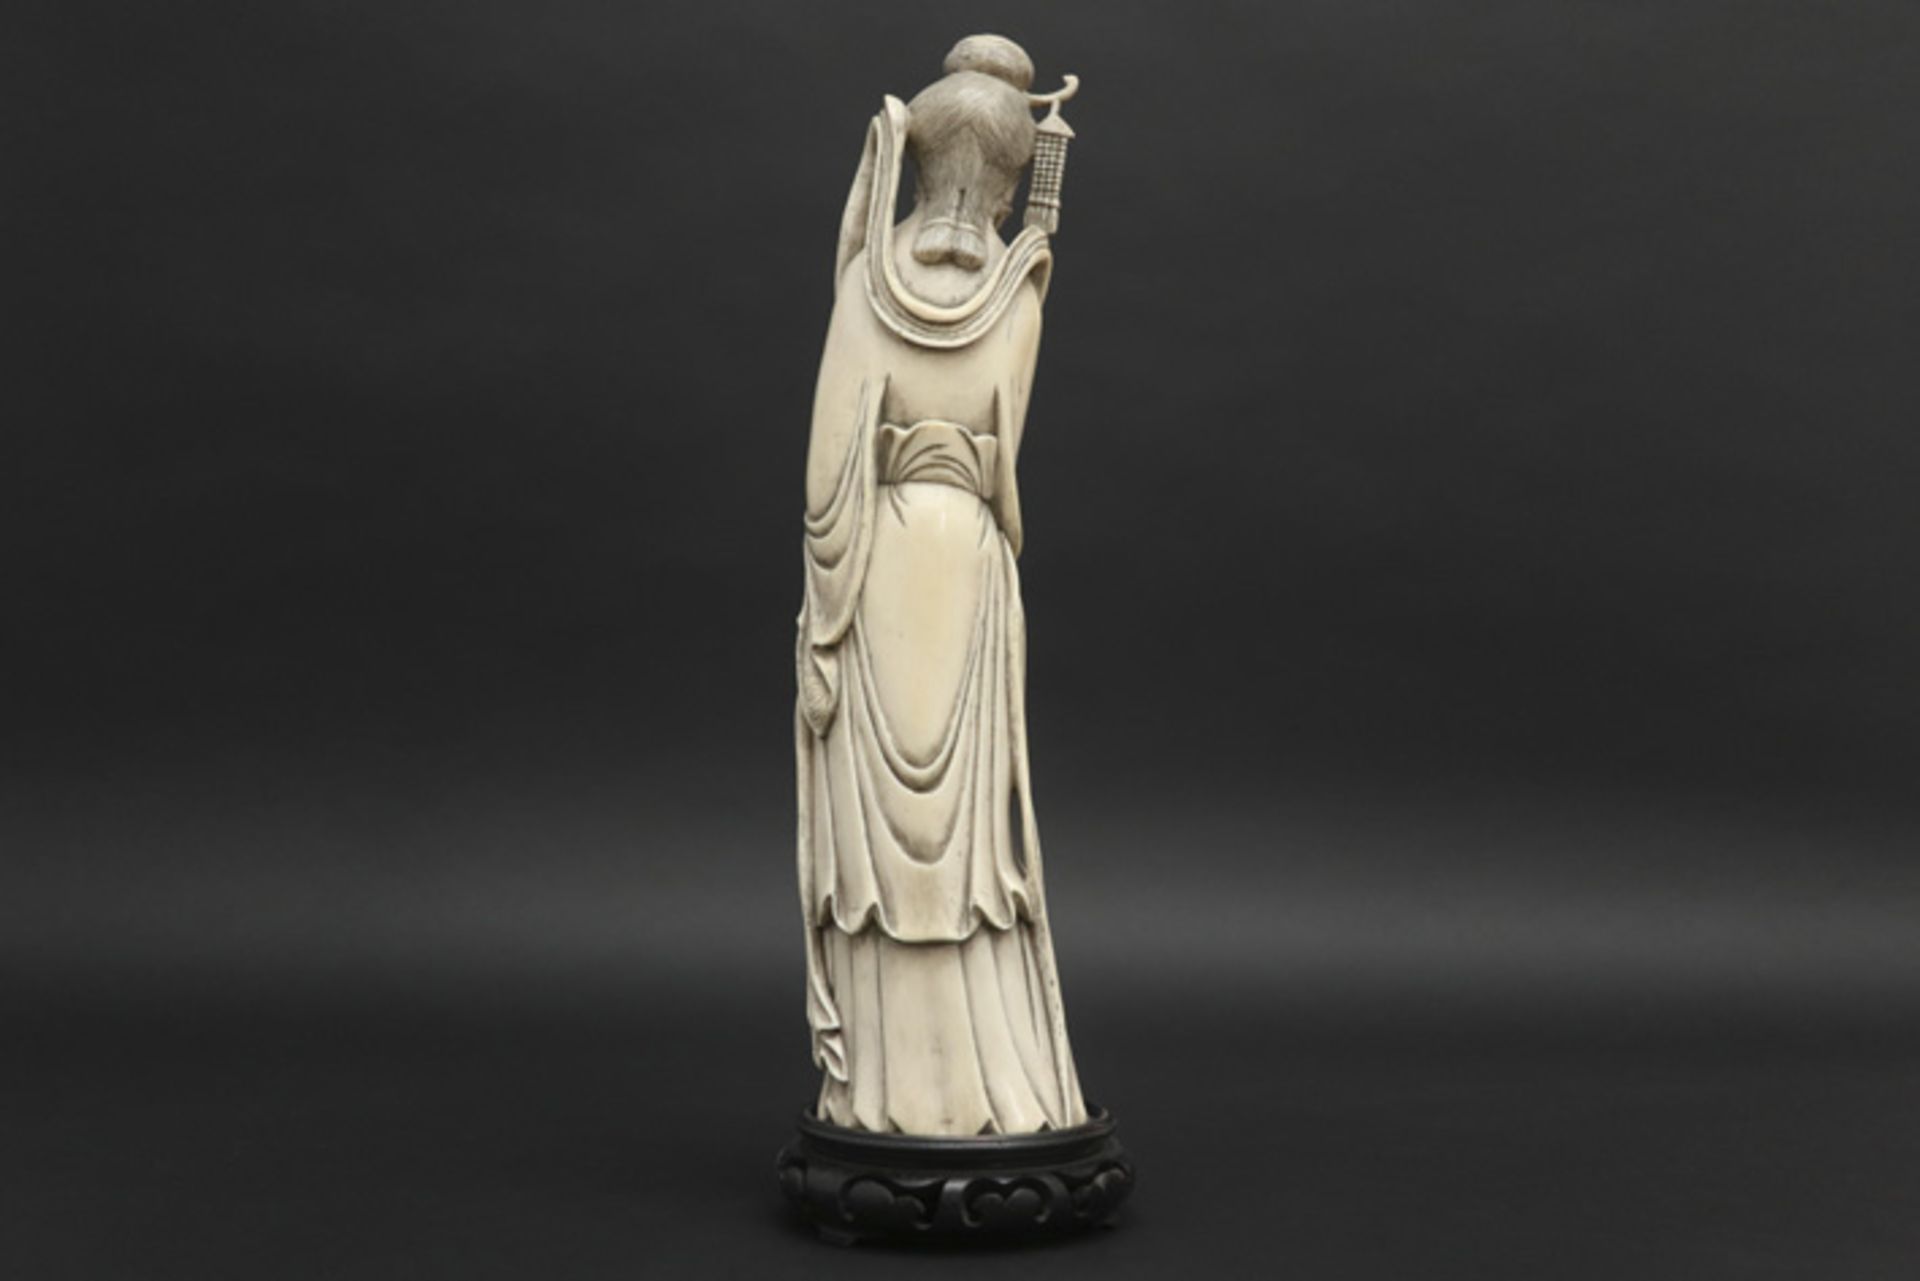 'antique' Chinese "Court Lady with flute" sculpture in ivory || 'Antieke' Chinese sculptuur in ivoor - Image 3 of 3